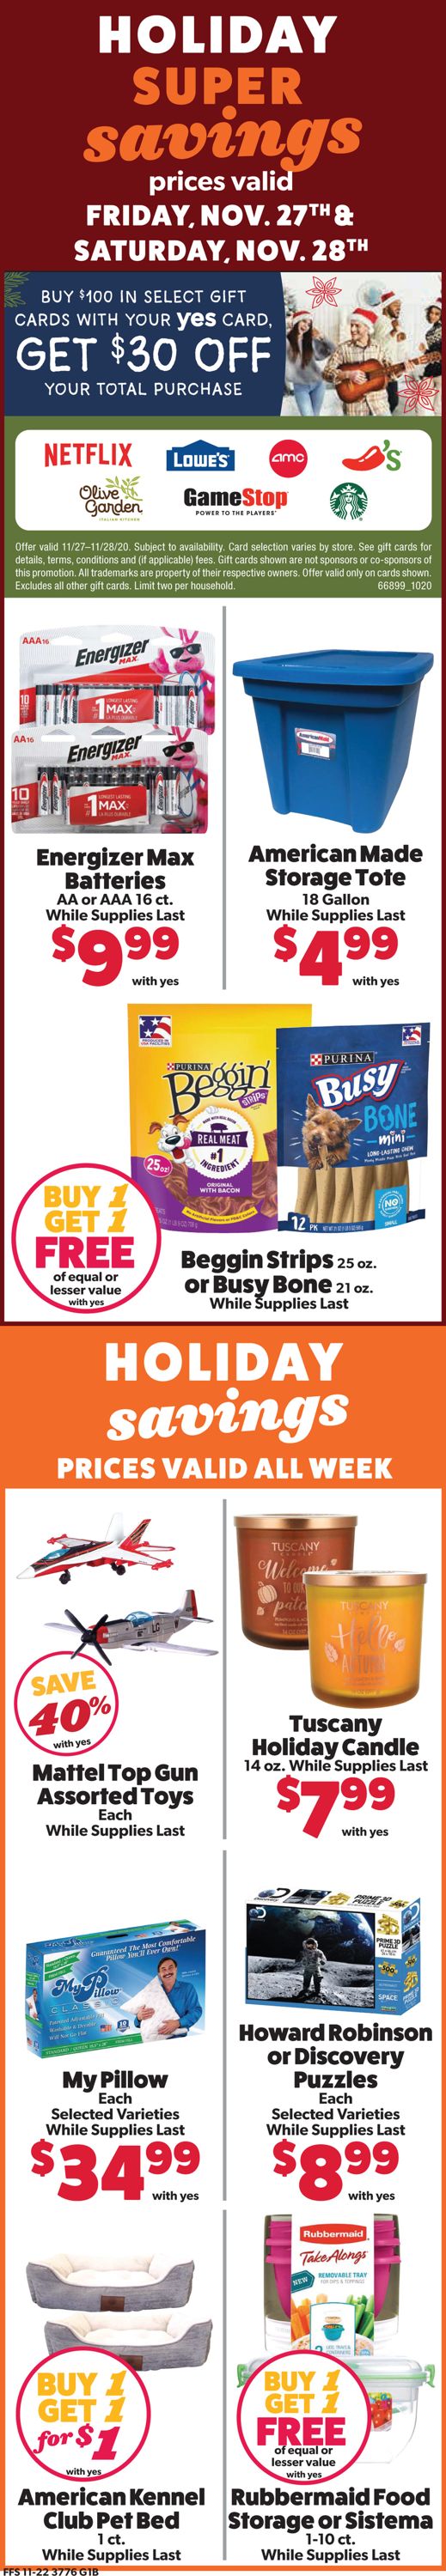 Family Fare Ad from 11/27/2020